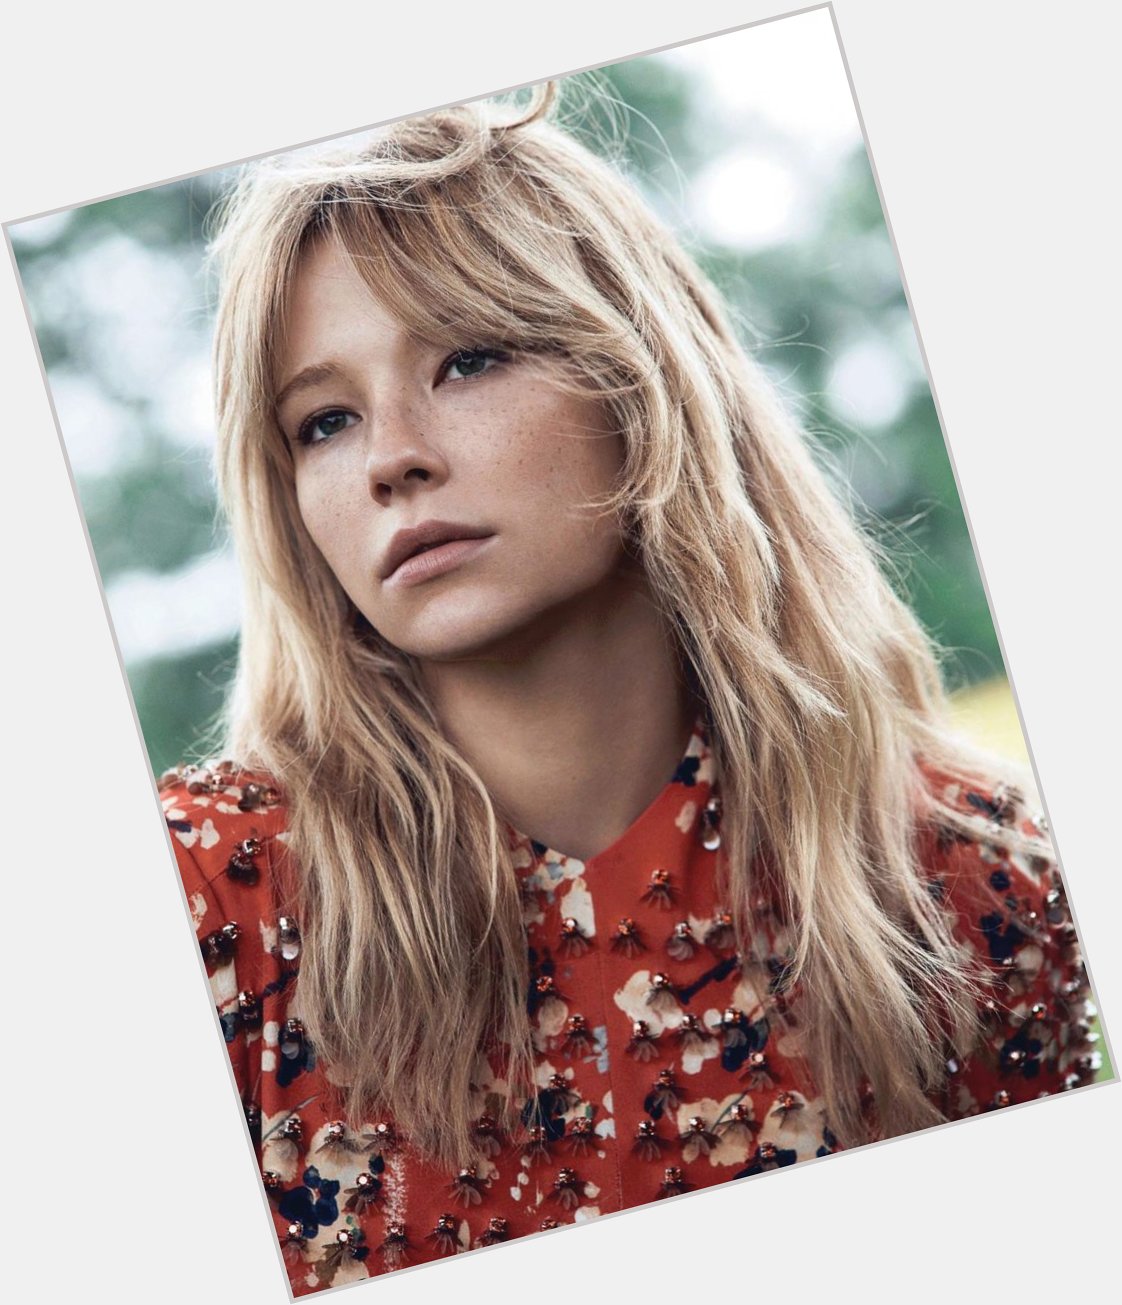 Happy Birthday to the gorgeous & talented Haley Bennett! 